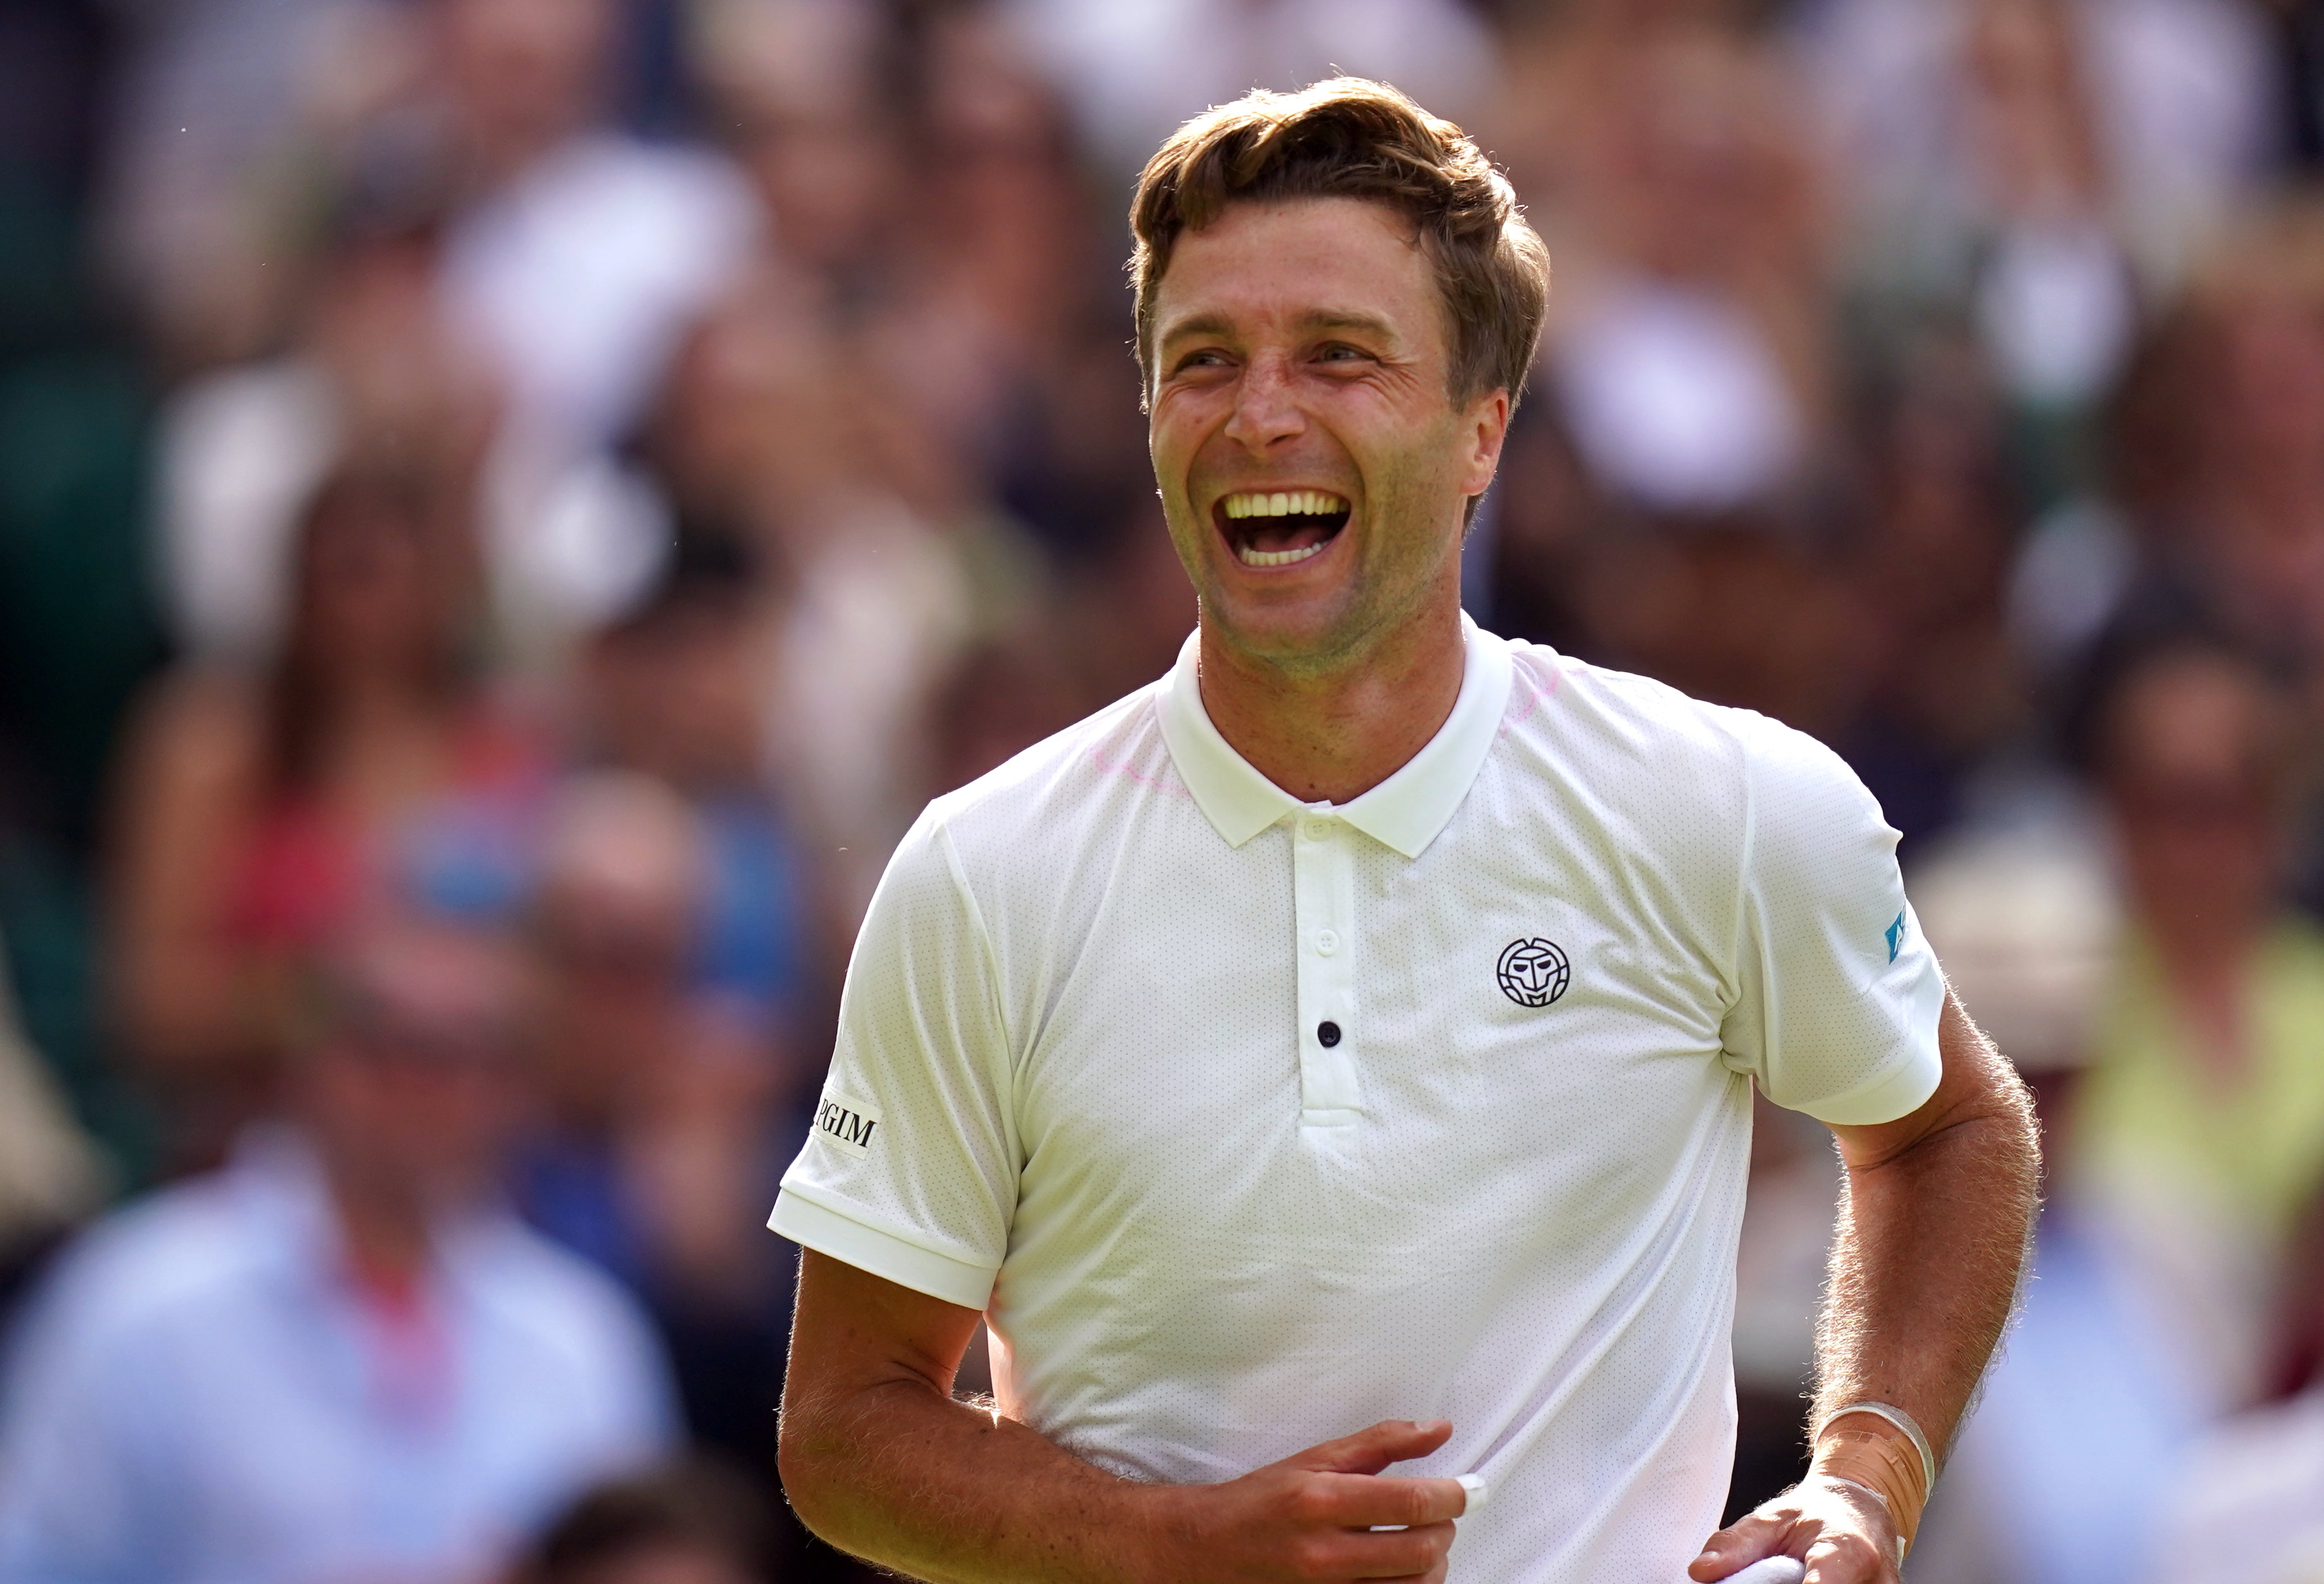 pa ready, liam broady, wimbledon, centre court, casper ruud, nottingham, atp tour, twitter, liam broady glad to make wimbledon ‘in one piece’ after injury and concussion